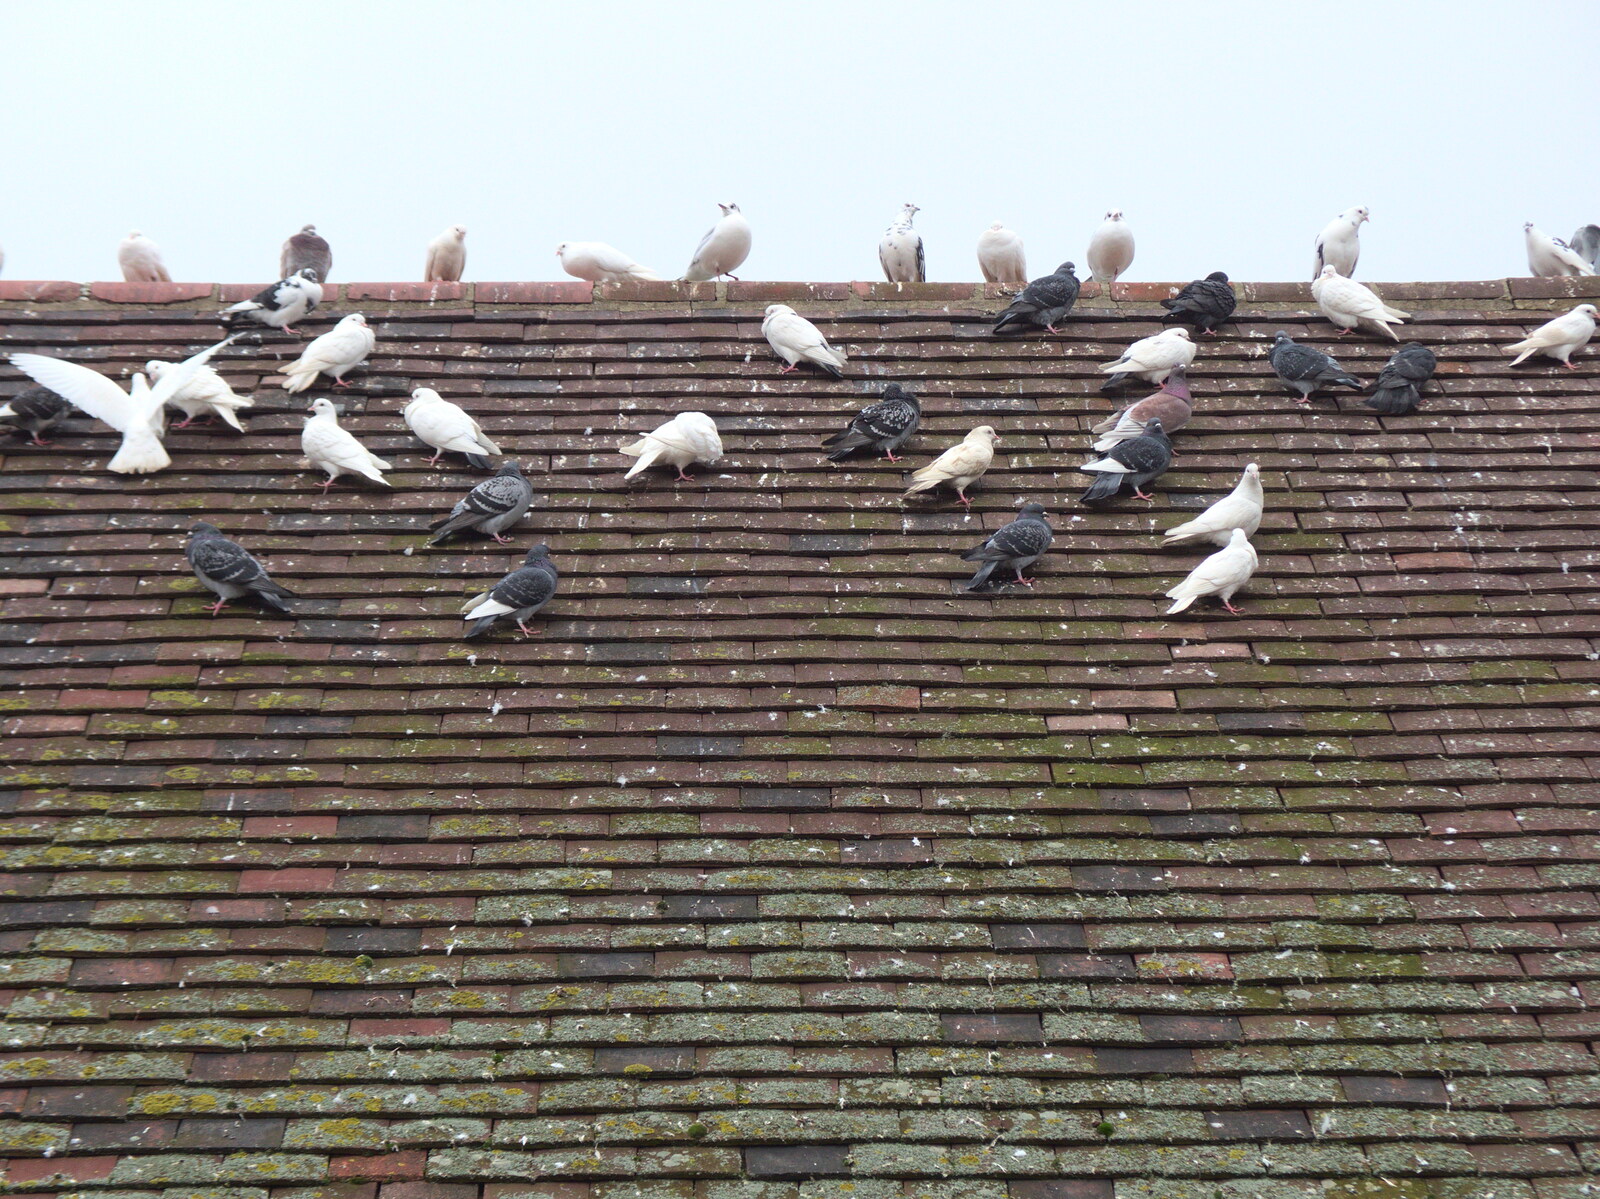 A million pigeons on the roof from January Misc: Haircut 100, Diss, Norfolk - 14th January 2018